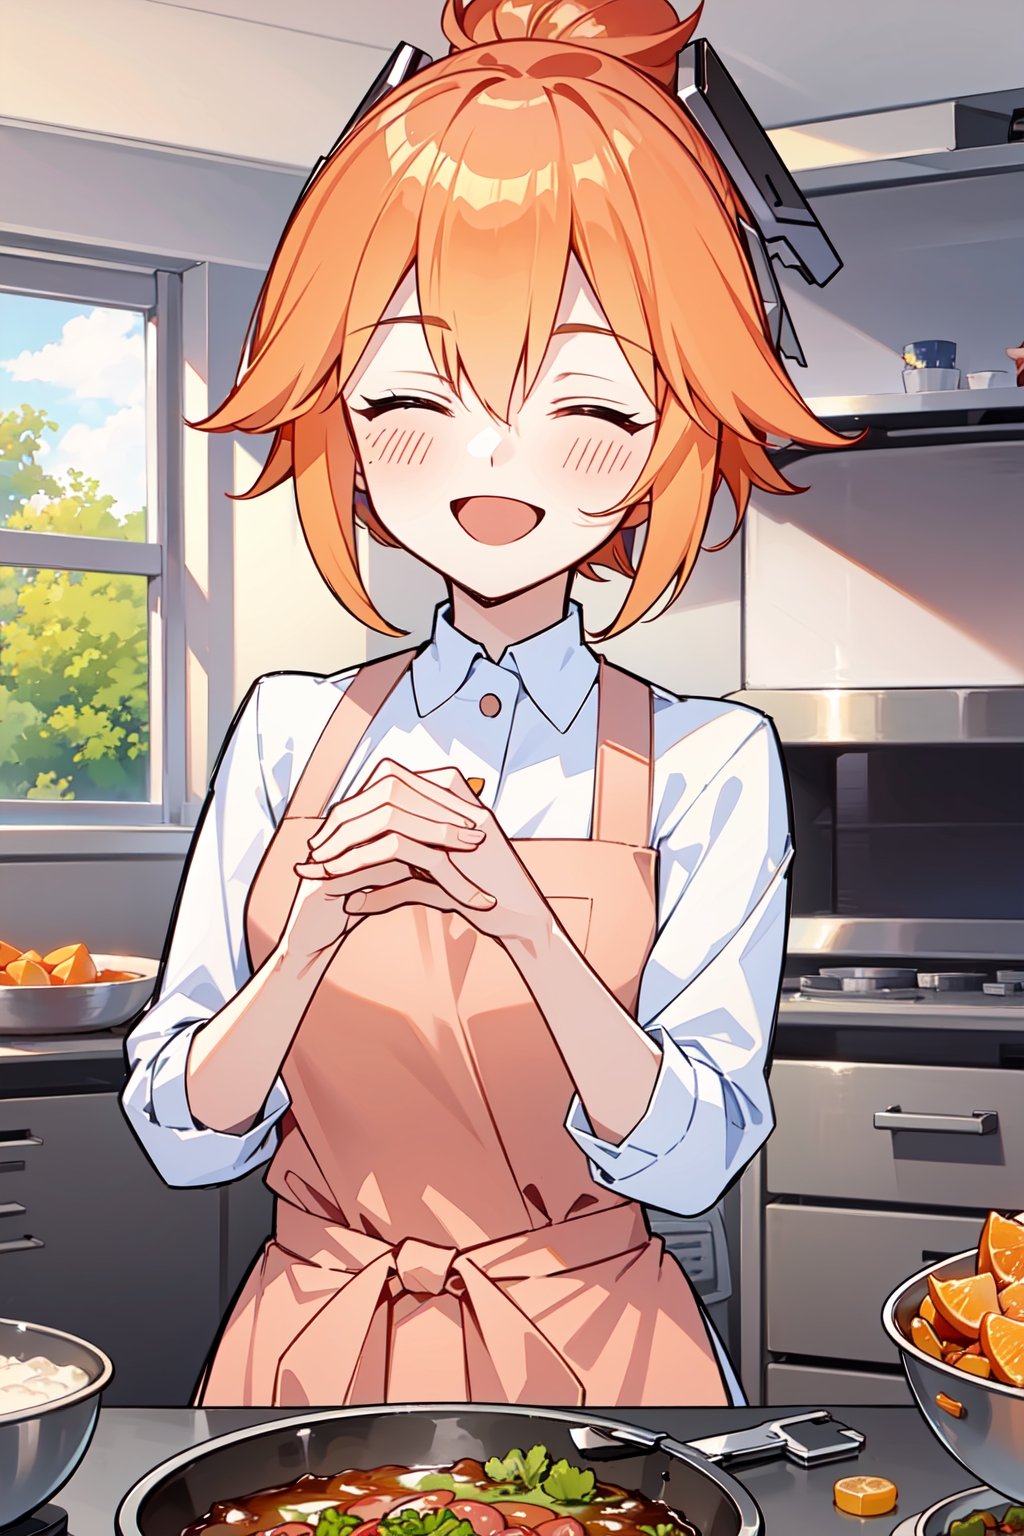 fanny, closed eyes, short ponytail hair, orange hair, upper body, happy, enthusiastic, smiling, grinning, shy, both hands on cheeks, white shirt aspirants, slim waist, pink apron, indoors kitchen, ingredients cooking, masterpieces.